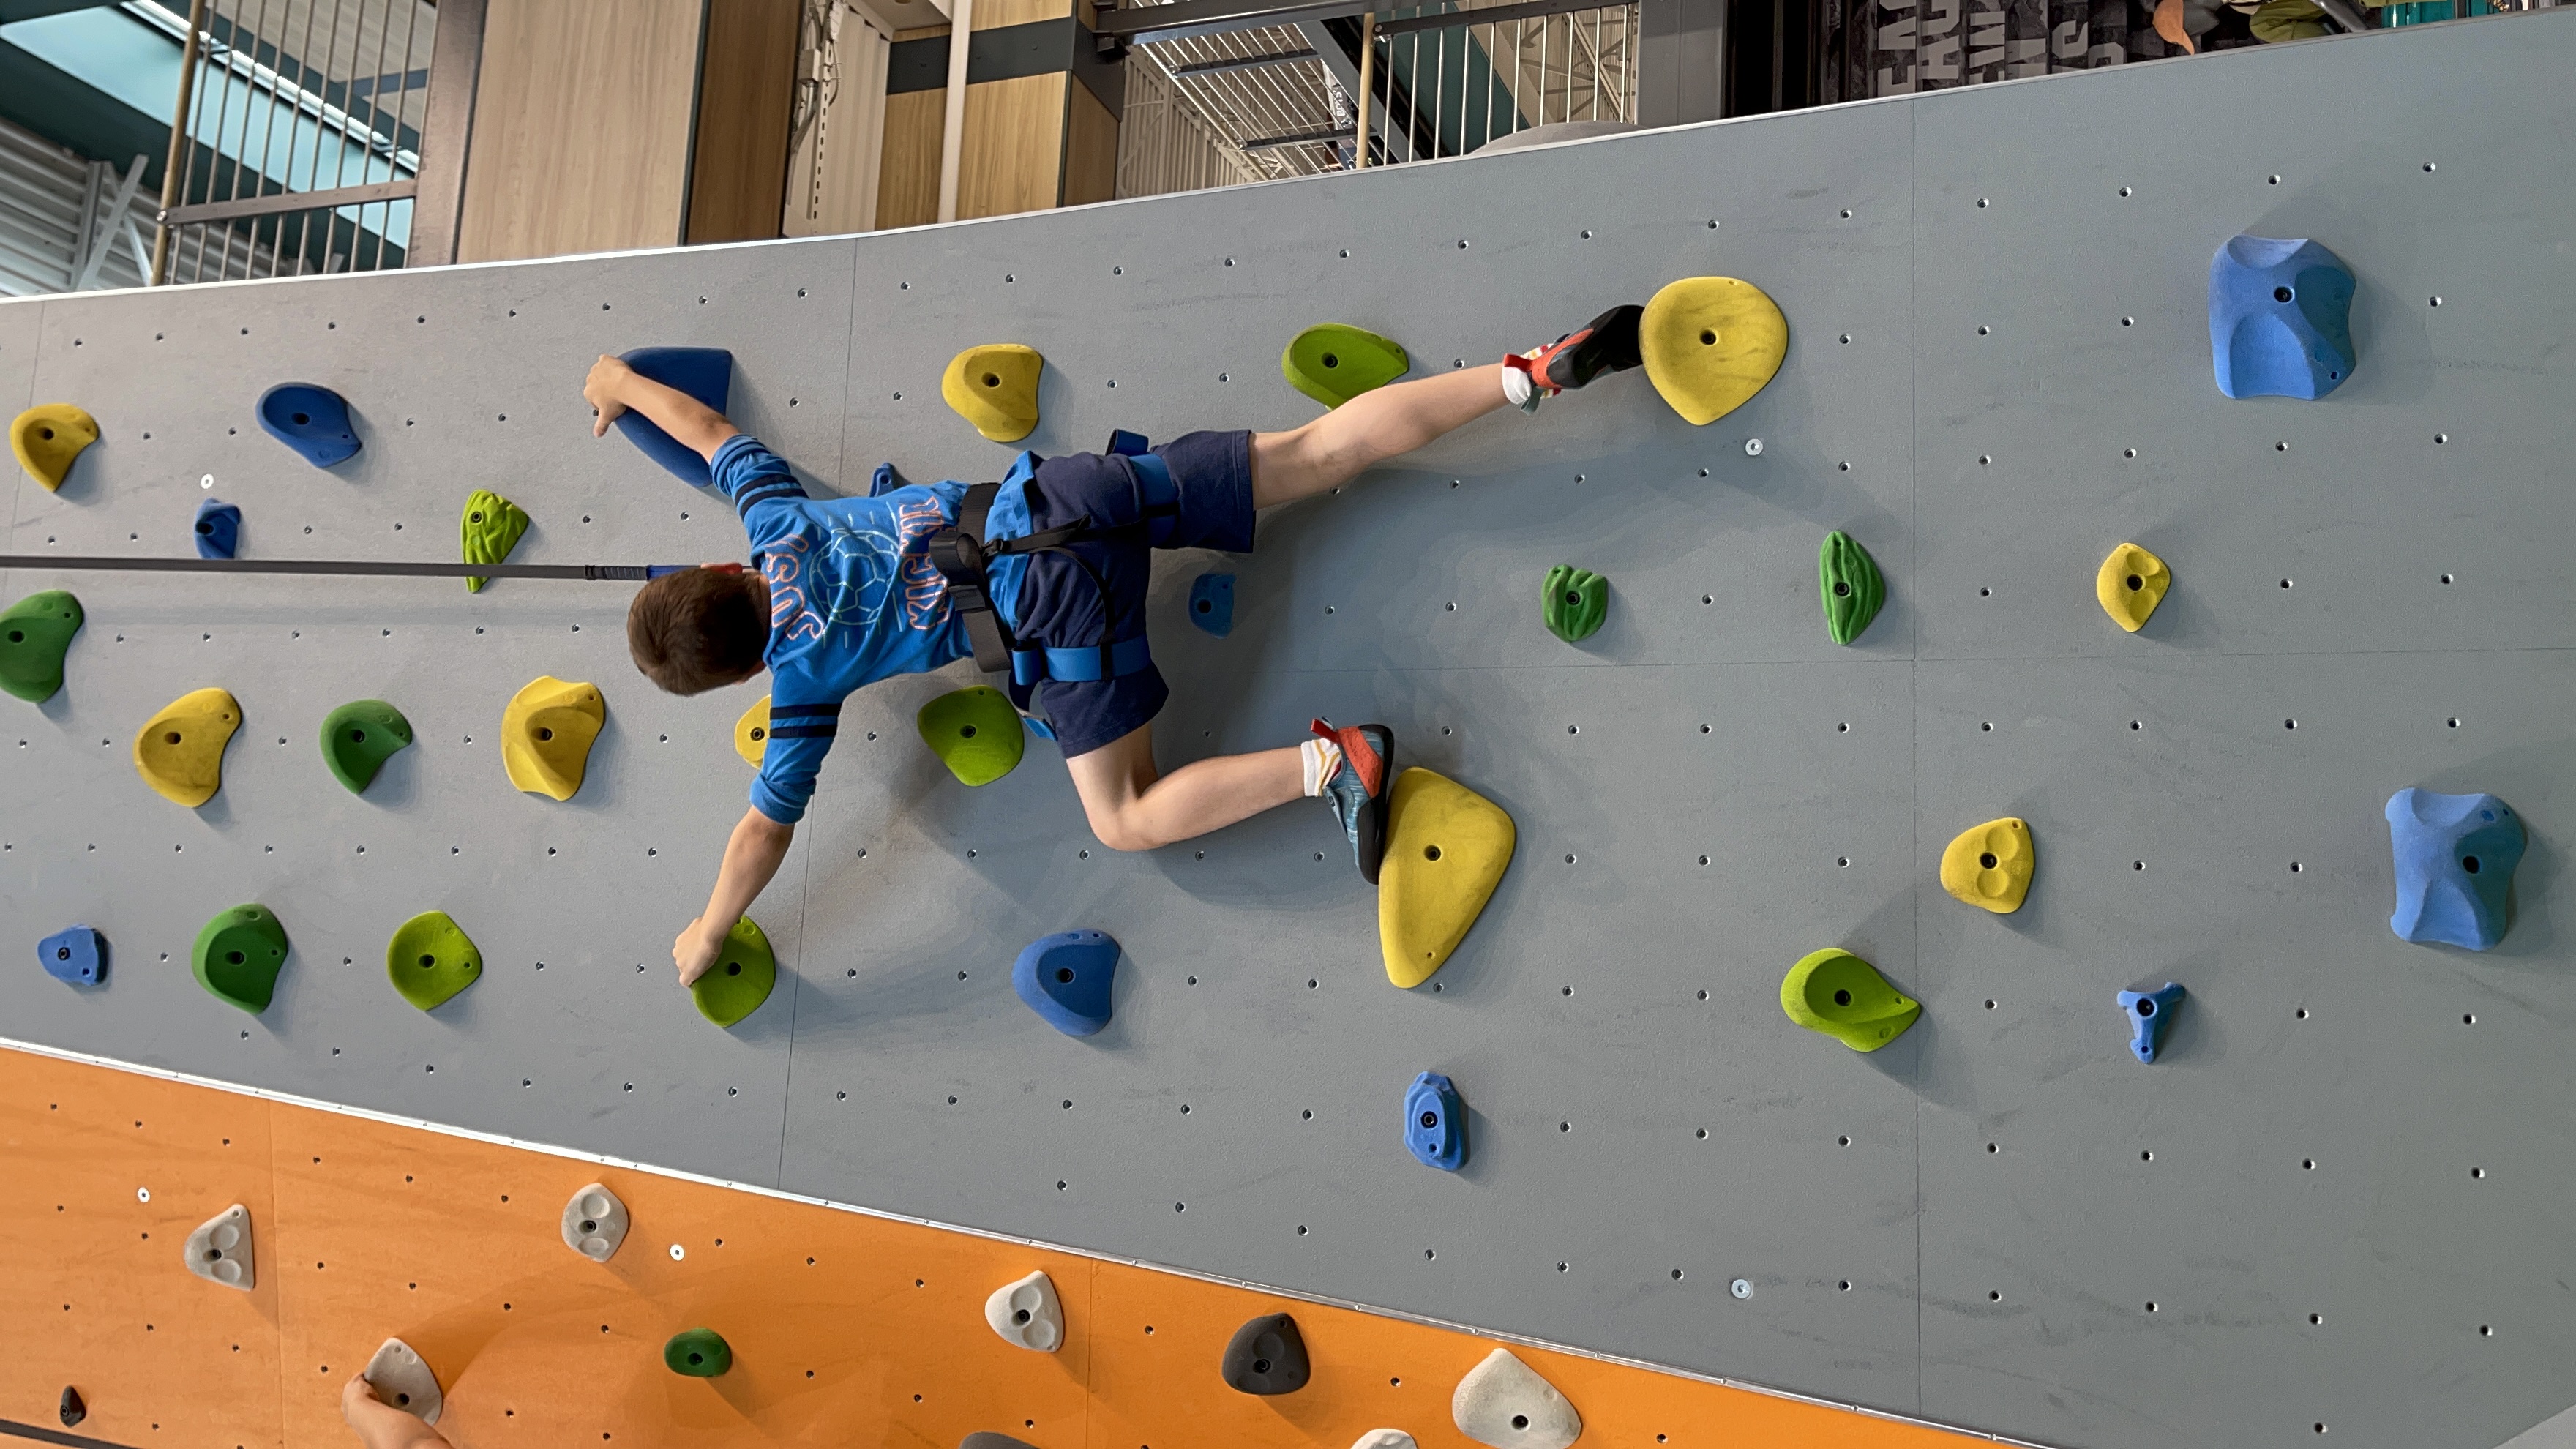 Dick's Sporting Goods Knoxville indoor climbing wall